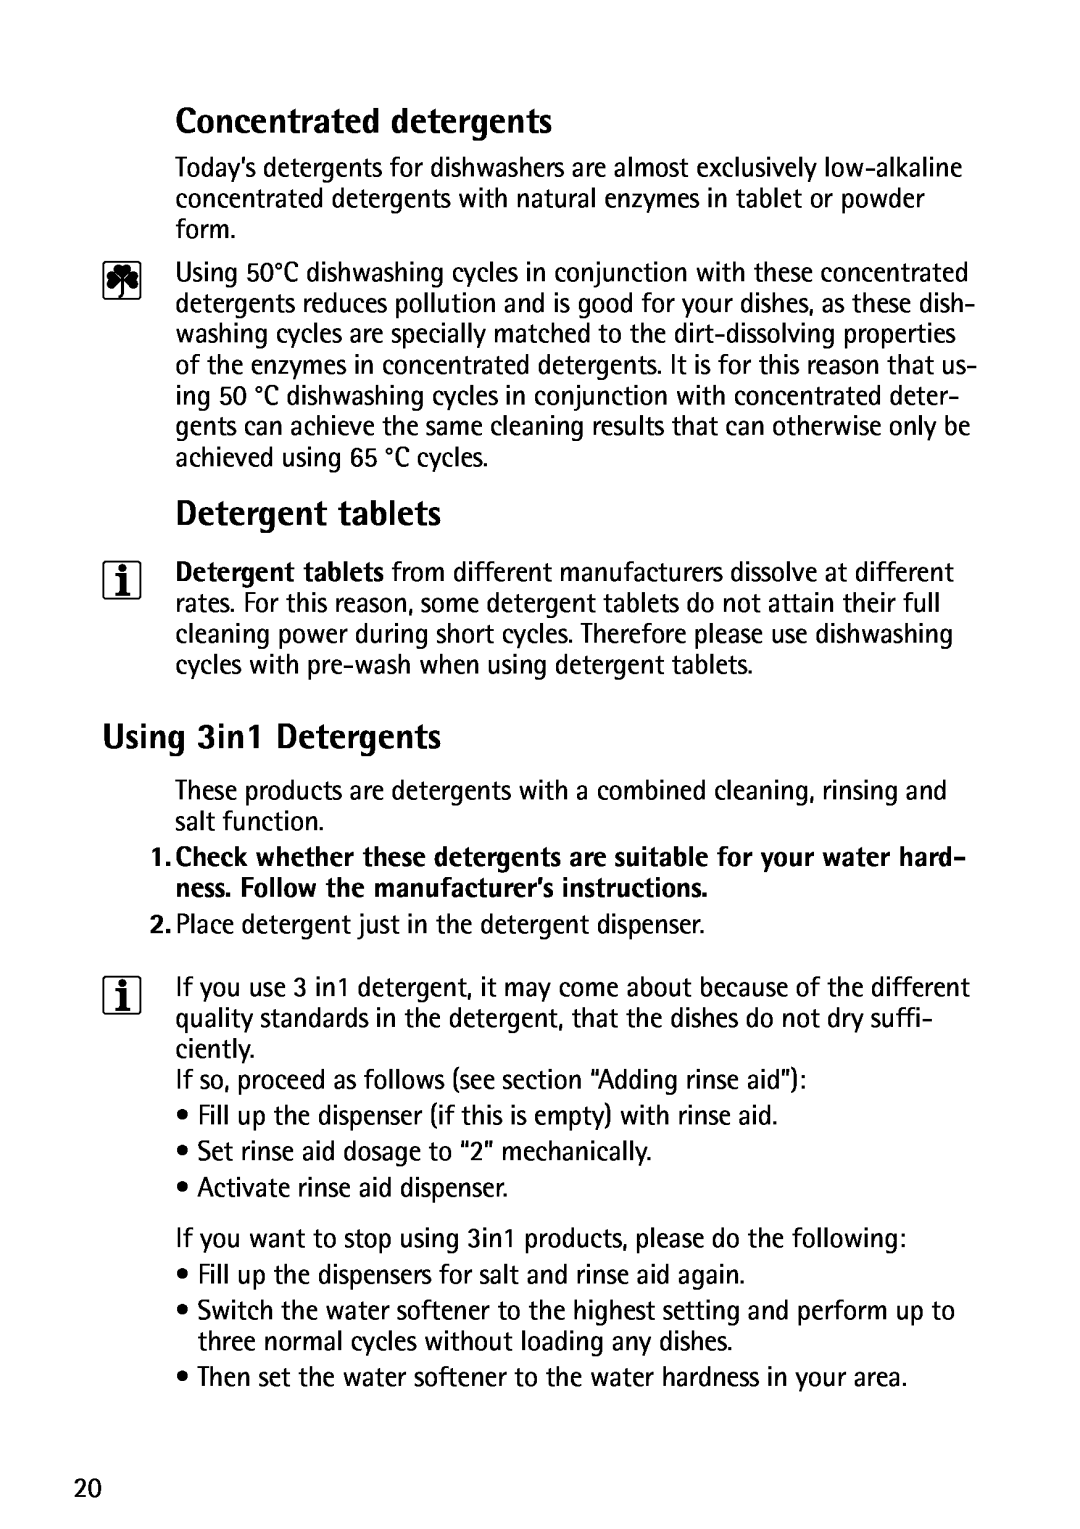 John Lewis JLDWS1202 instruction manual Concentrated detergents, Detergent tablets, Using 3in1 Detergents 